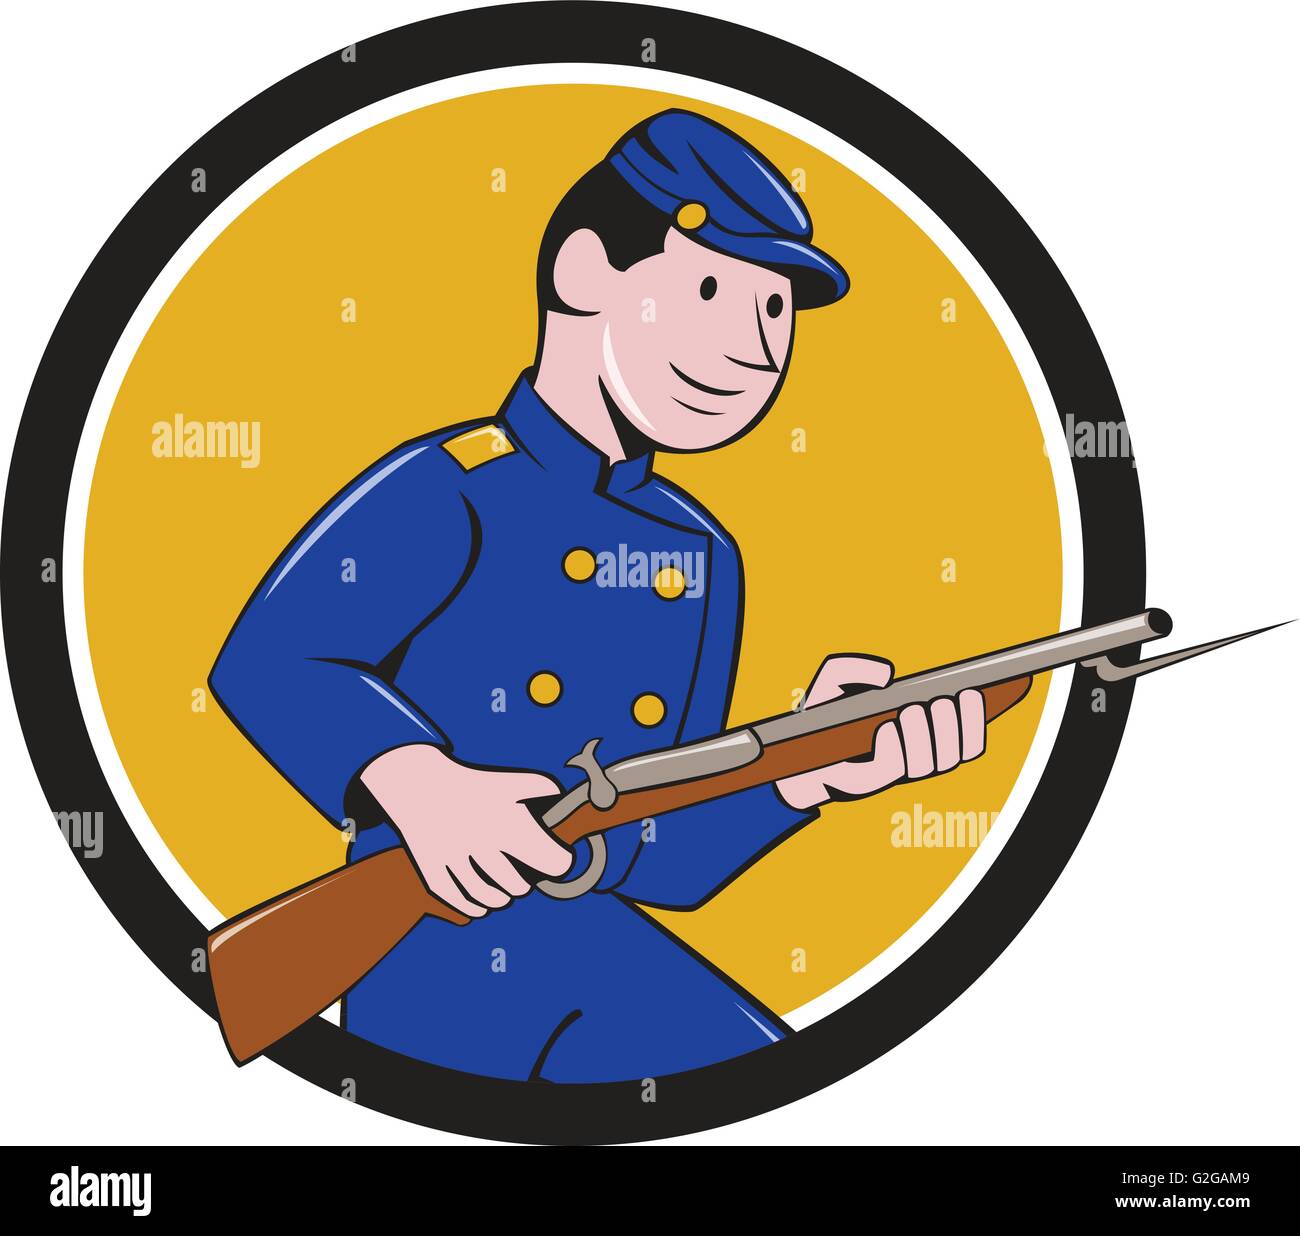 Illustration of a Union Army soldier during the American Civil War holding rifle with bayonet set inside circle on isolated background done in cartoon style. Stock Vector